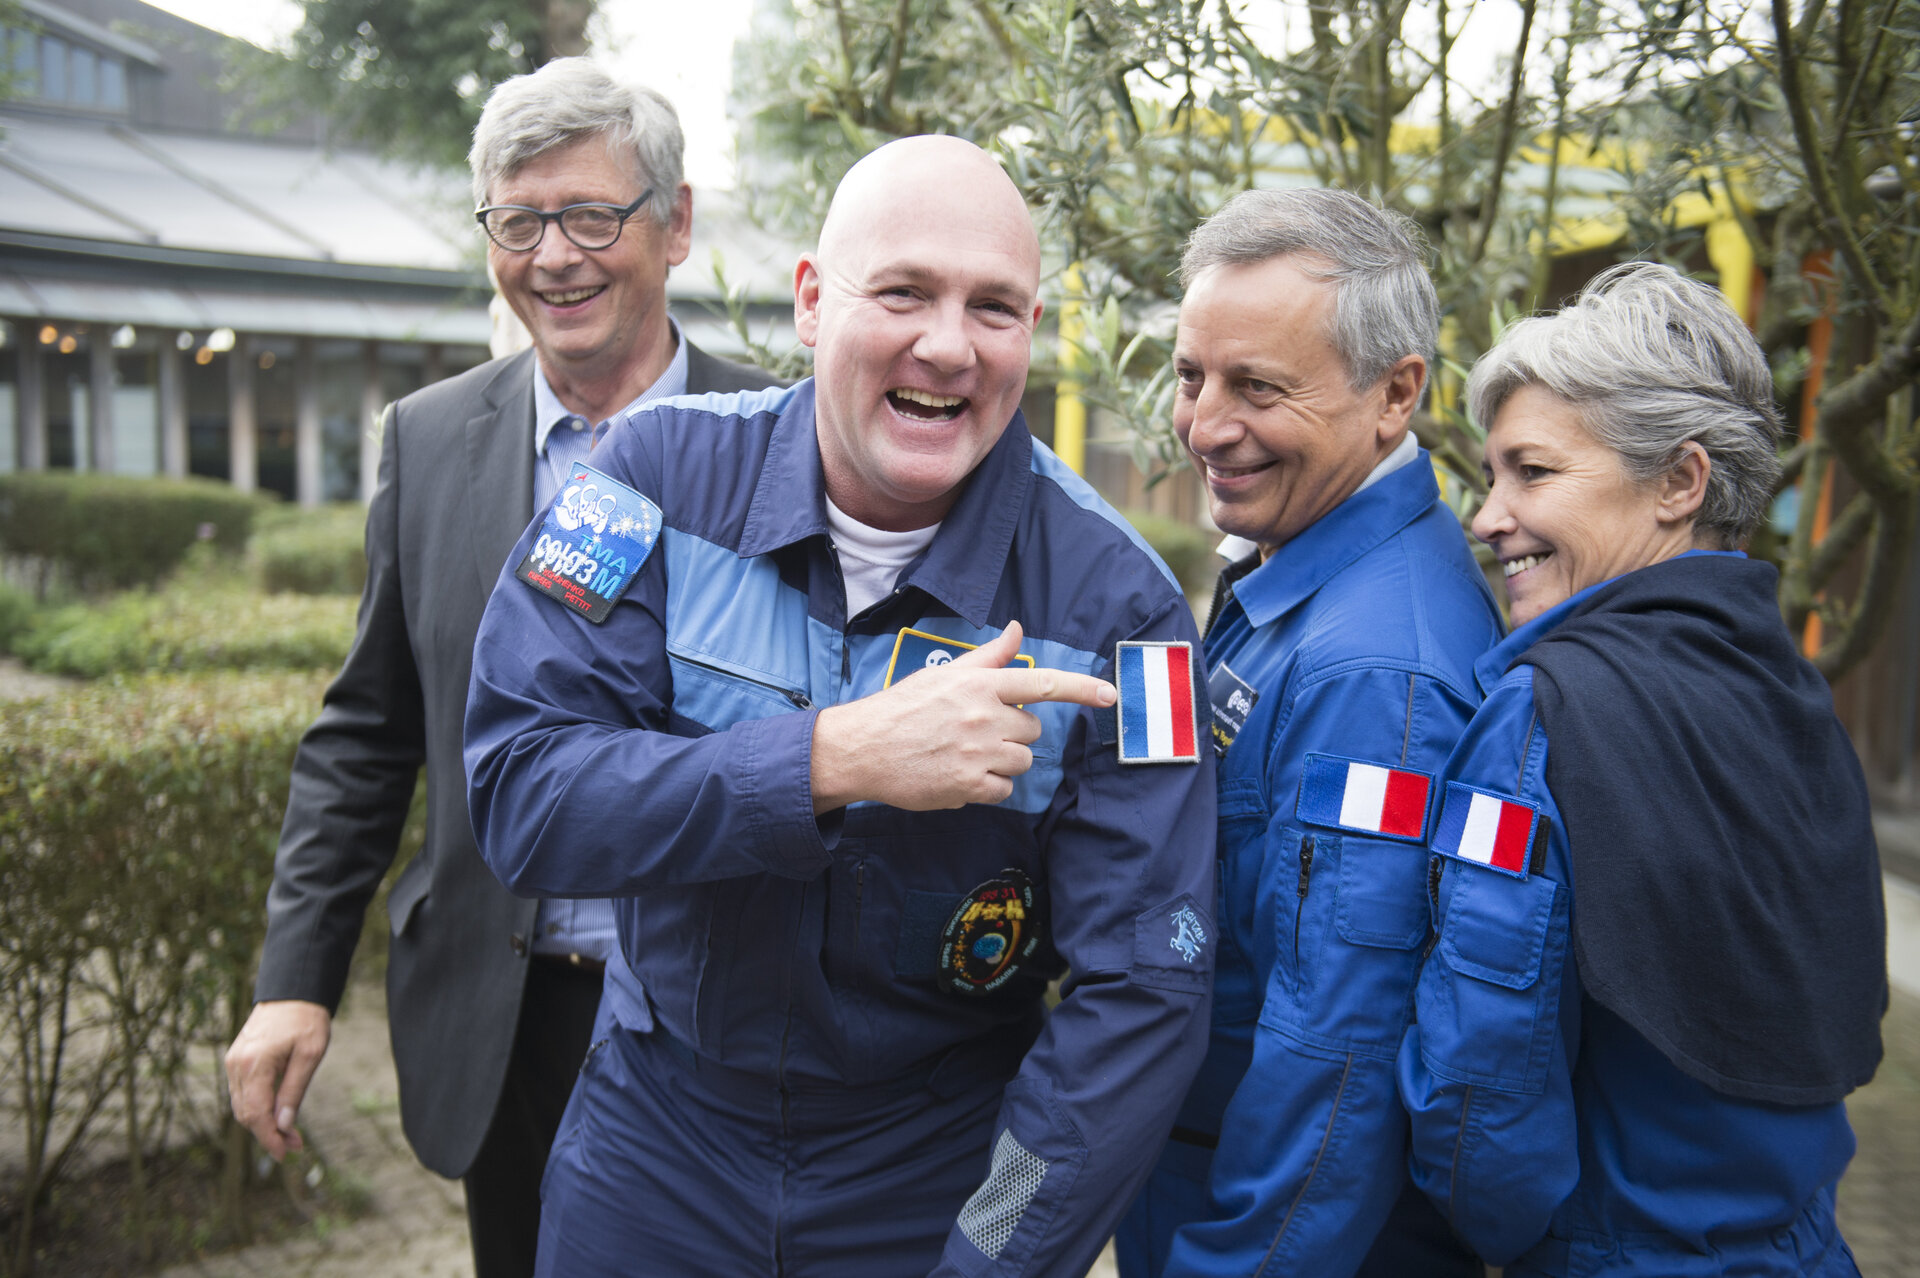 Astronauts at Open Day